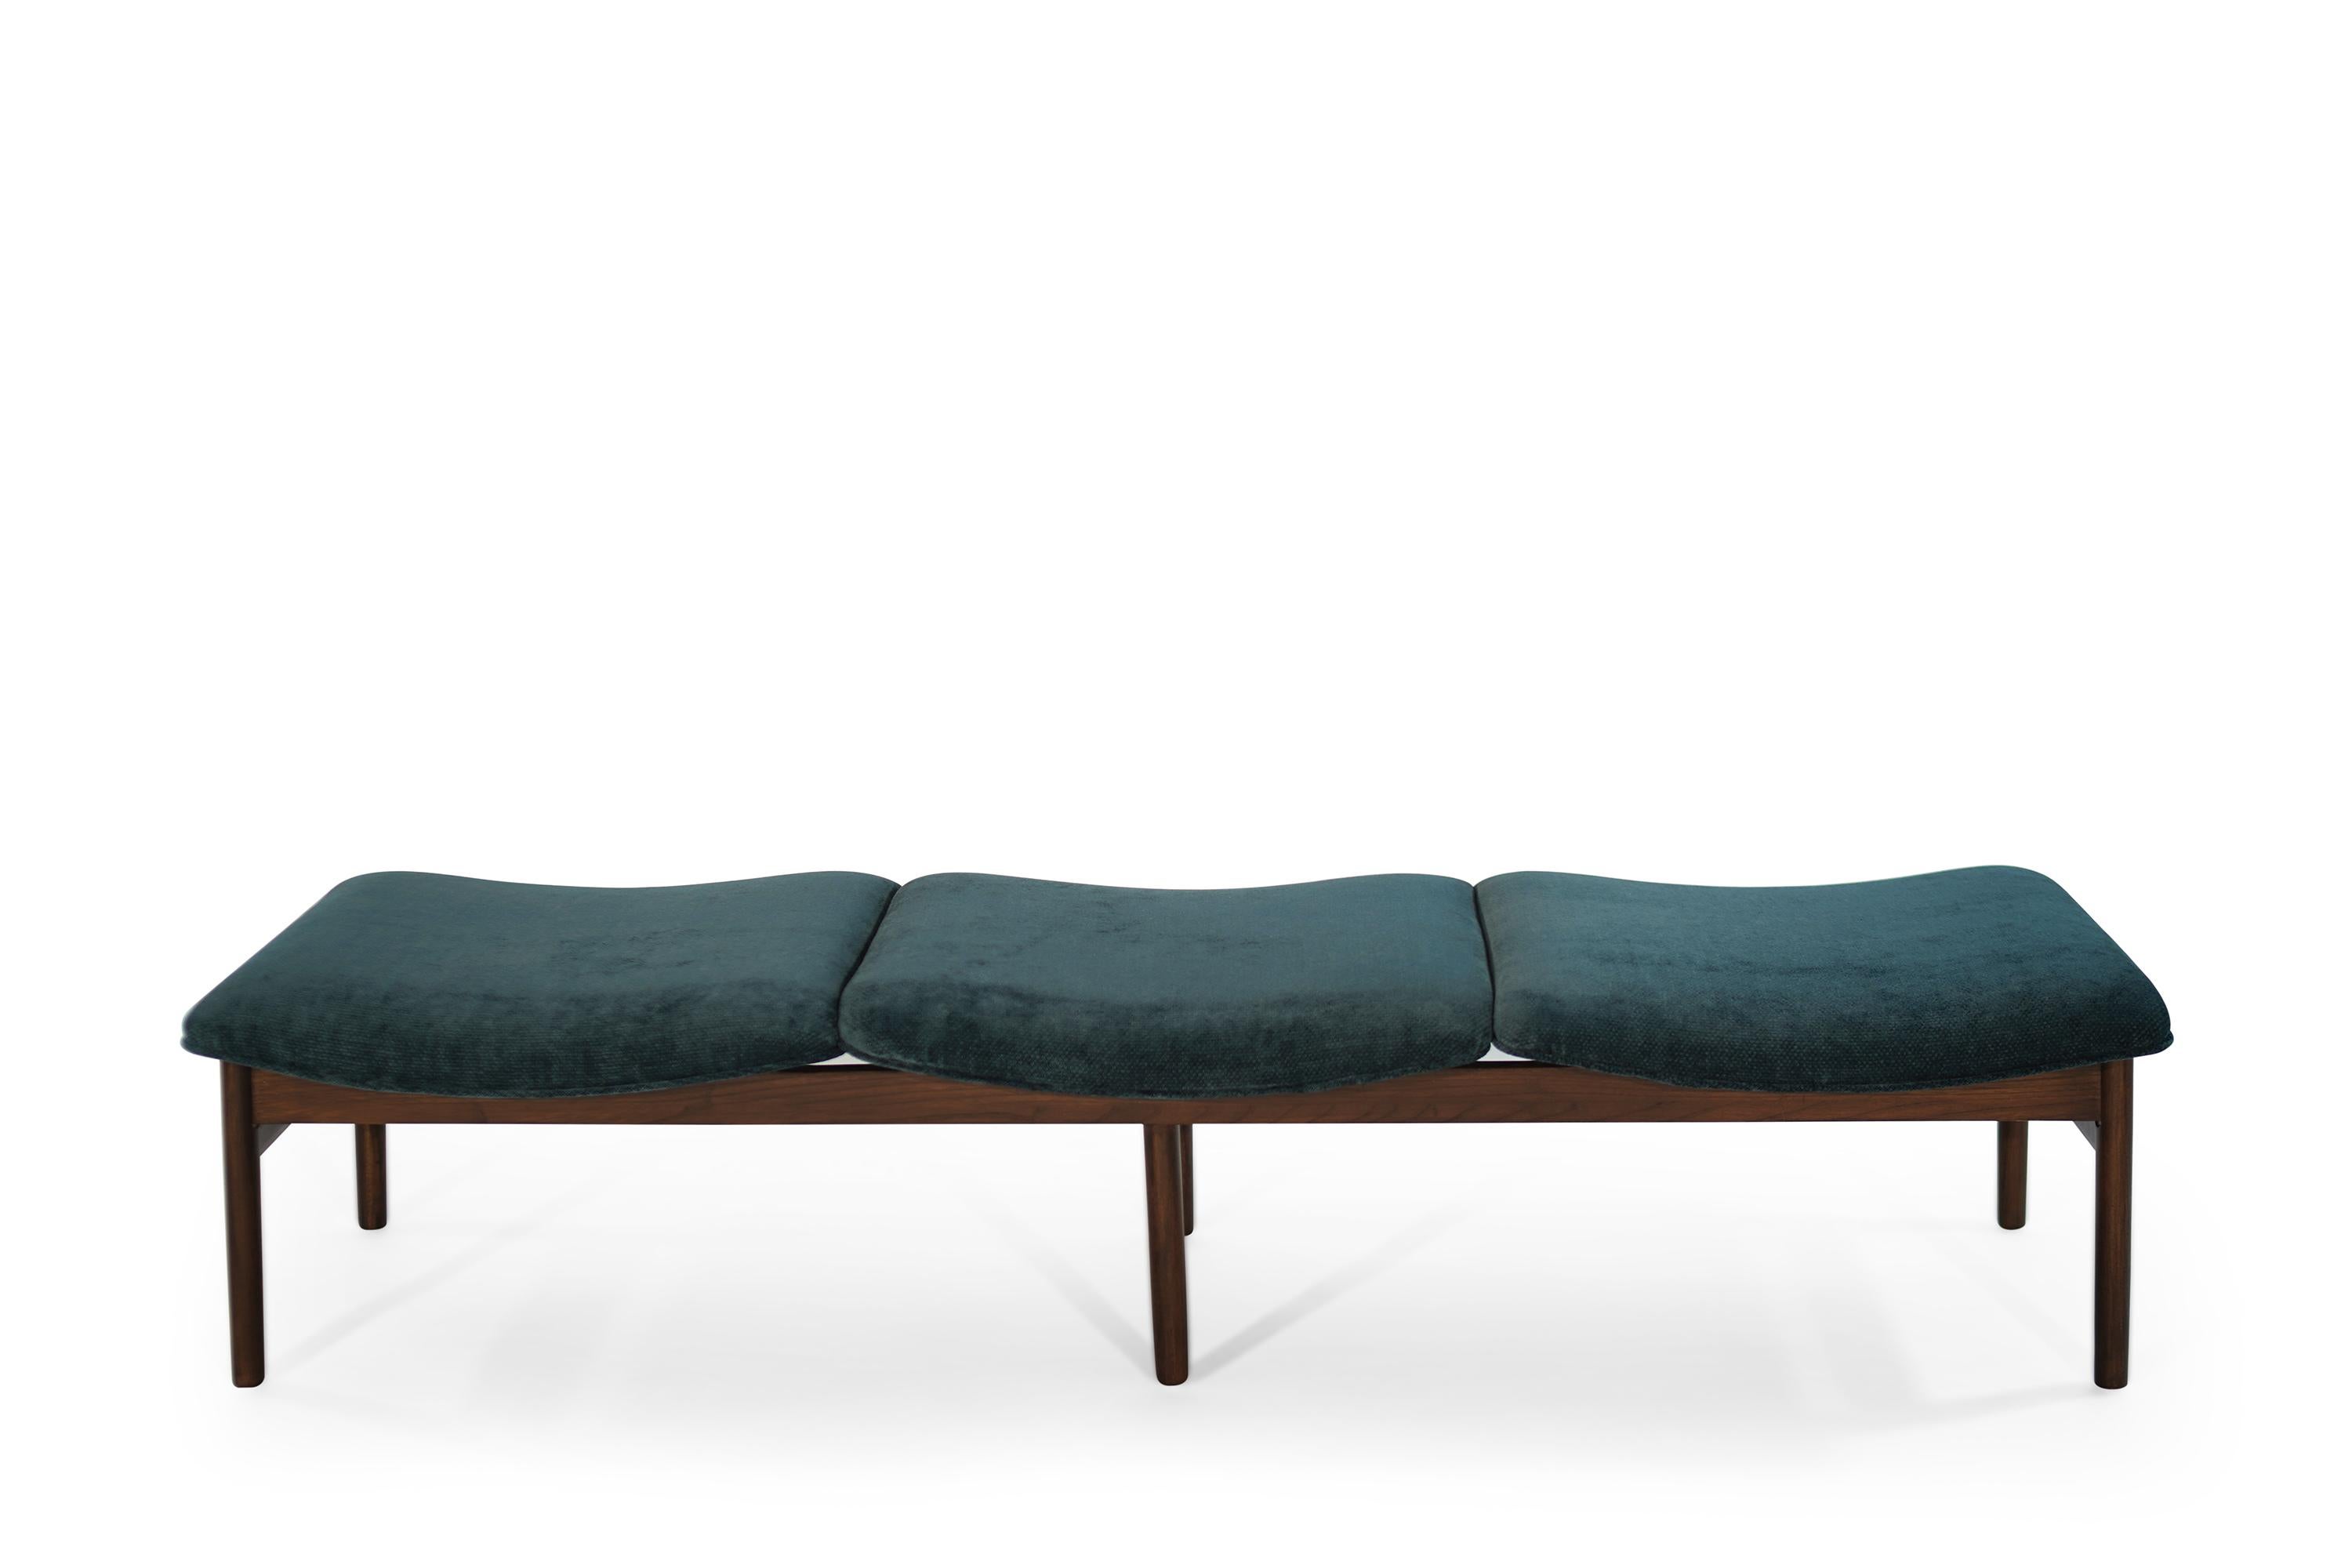 Rarely see three-seater bench designed by Lawrence Peabody for Nemschoff, circa 1950s. Walnut frame fully restored, newly upholstered in teal twill by Holly Hunt.